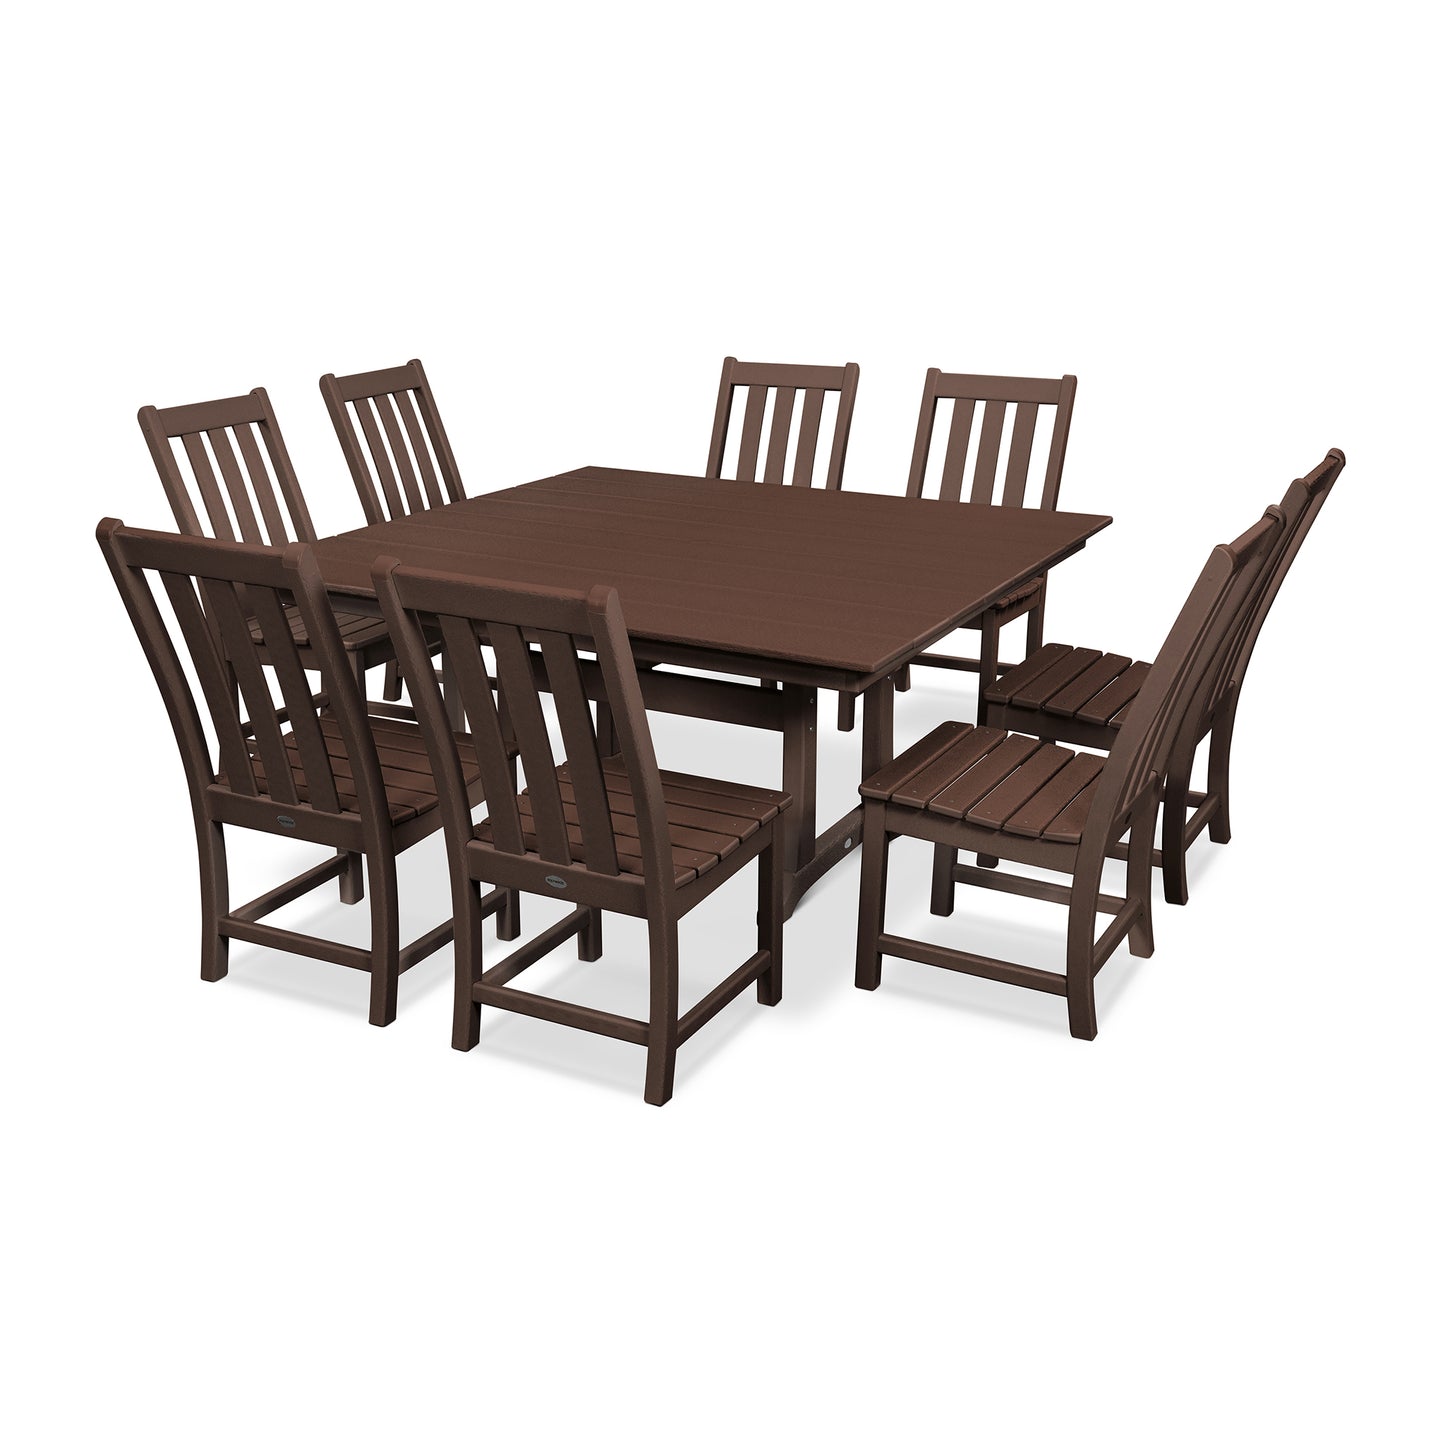 A dark brown POLYWOOD® Vineyard 9-Piece Farmhouse Trestle Dining Set with a rectangular table and six matching chairs on a white background. The chairs feature vertical slat backs.